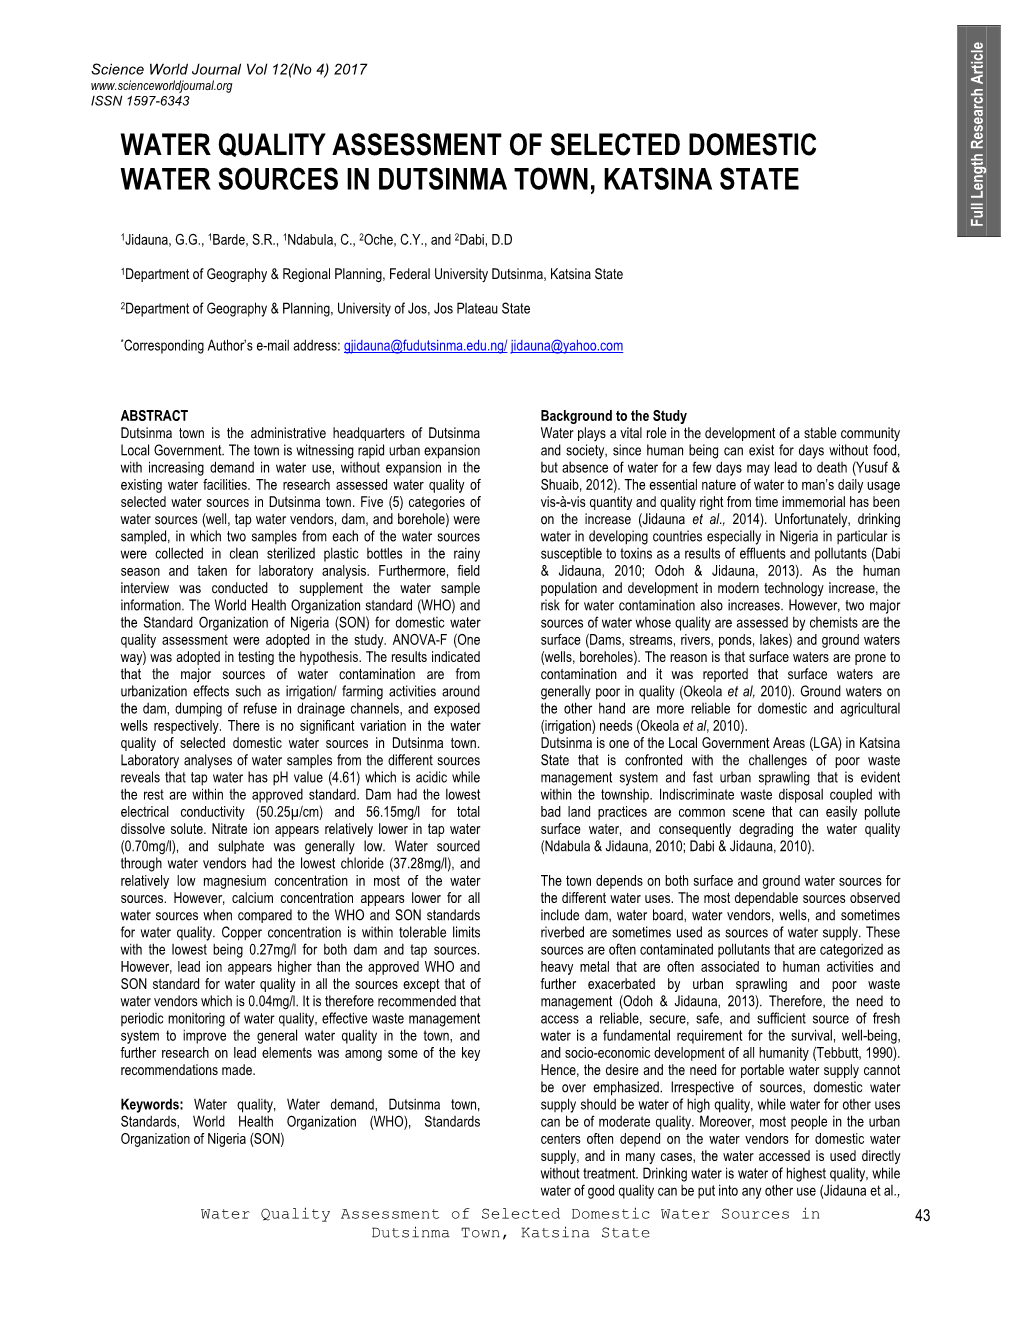 Water Quality Assessment of Selected Domestic Water Sources in Dutsinma Town, Katsina State